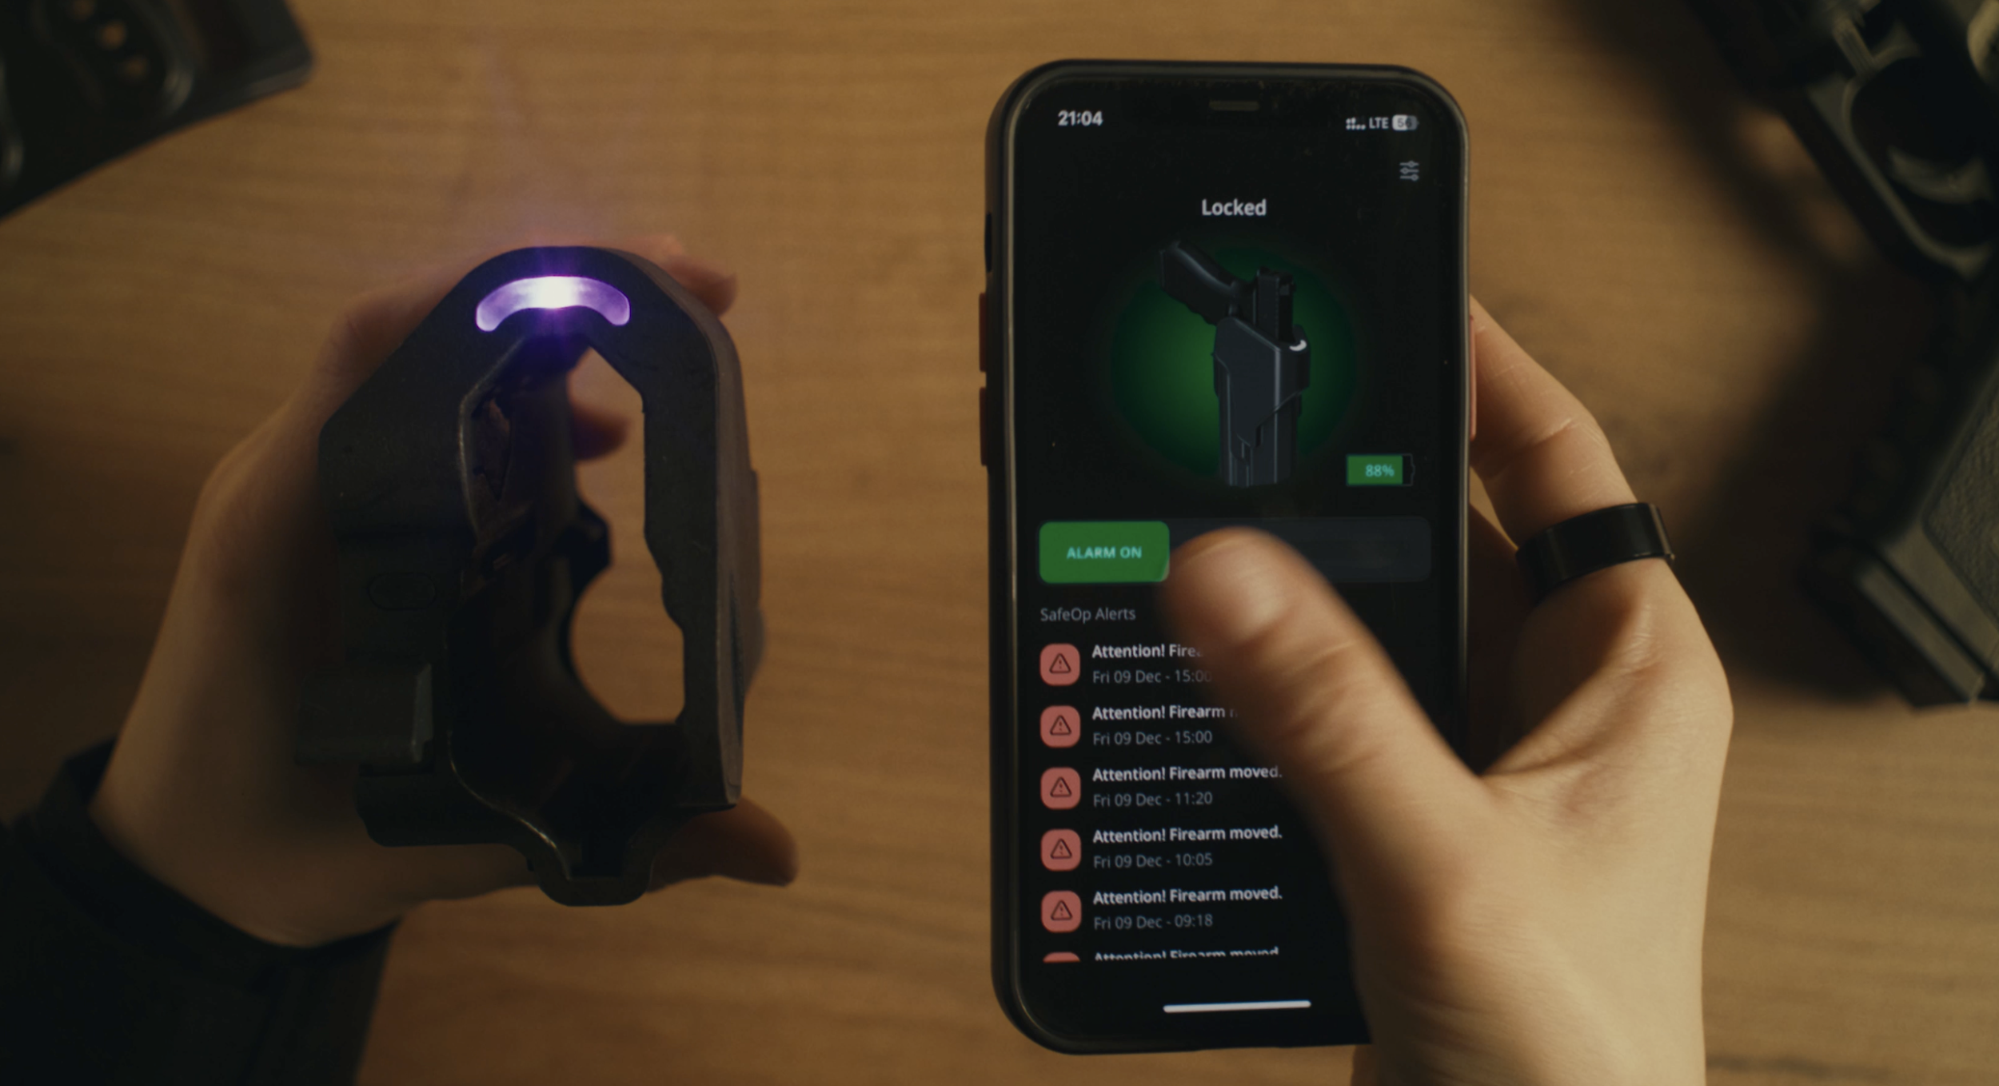 Configure the holster from your mobile phone